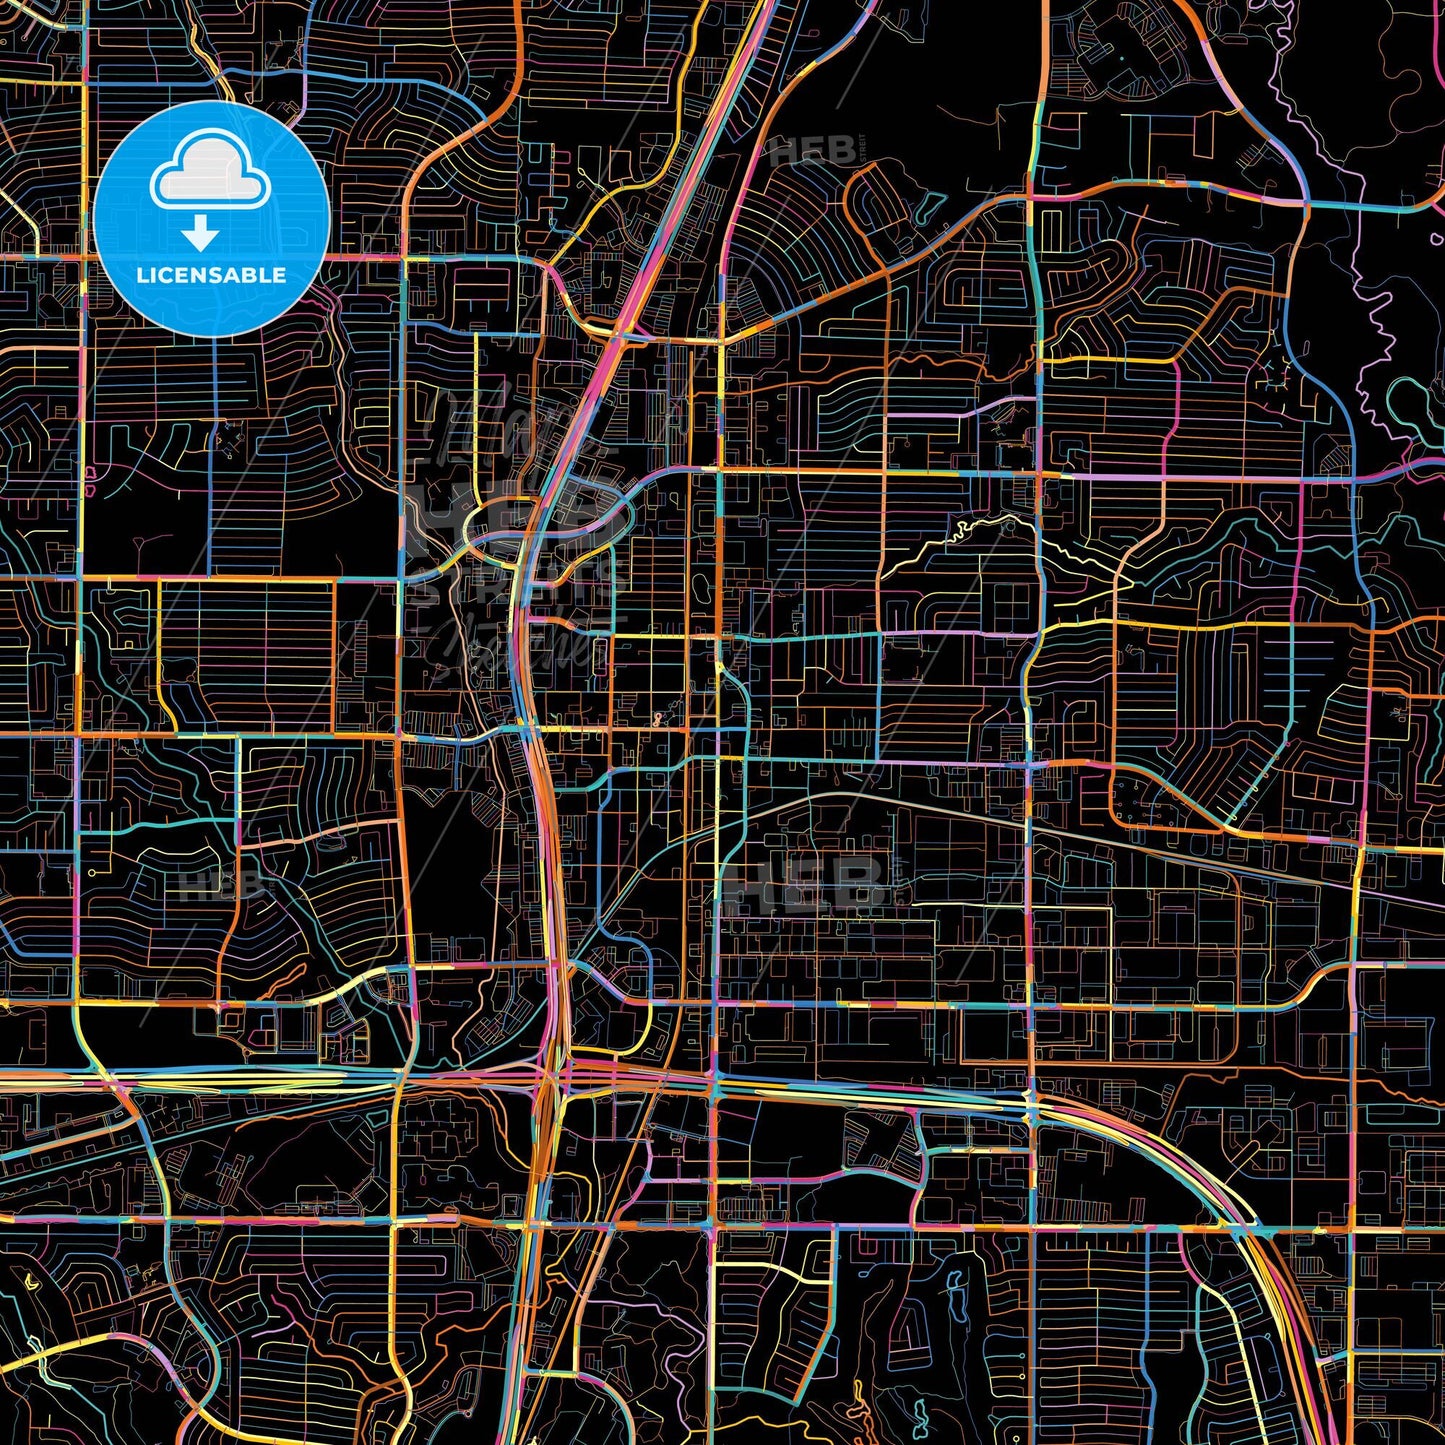 Plano, Texas, United States, colorful city map on black background